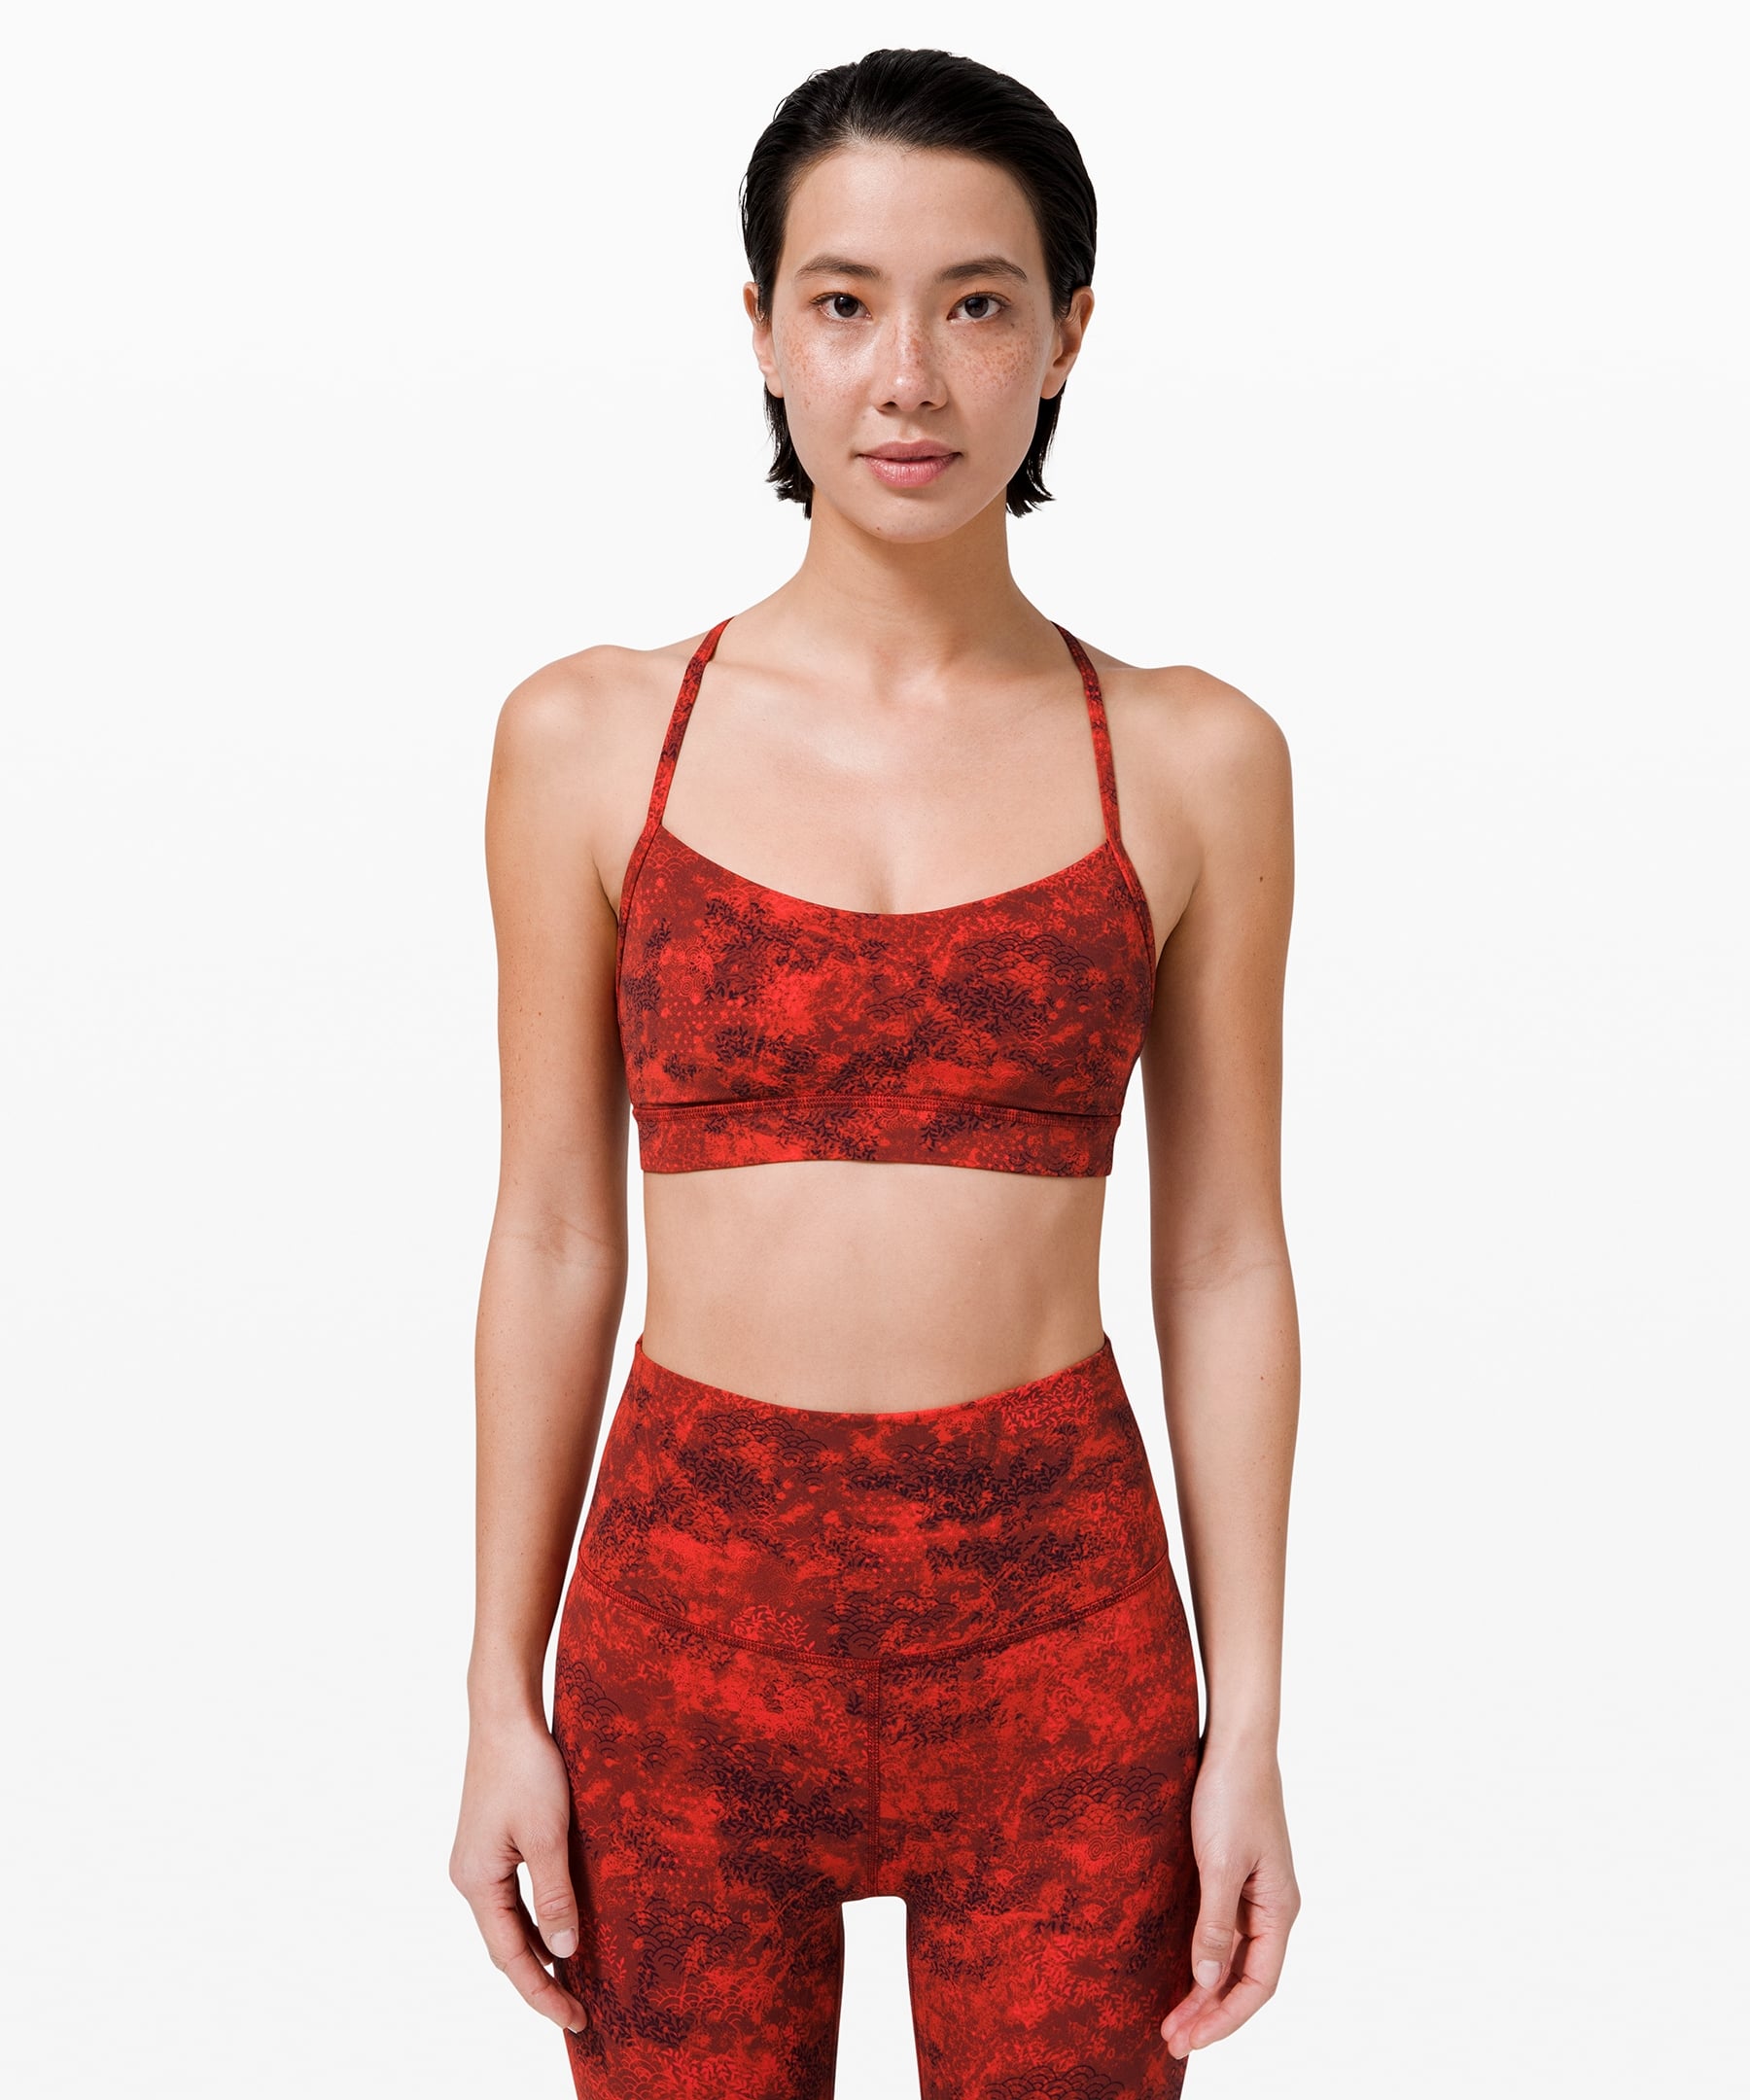 Lululemon Flow Y Bra in Intricate Oasis Love Red Multi, We're Tackling Our  Goals in February With the Help of These Health and Fitness Products